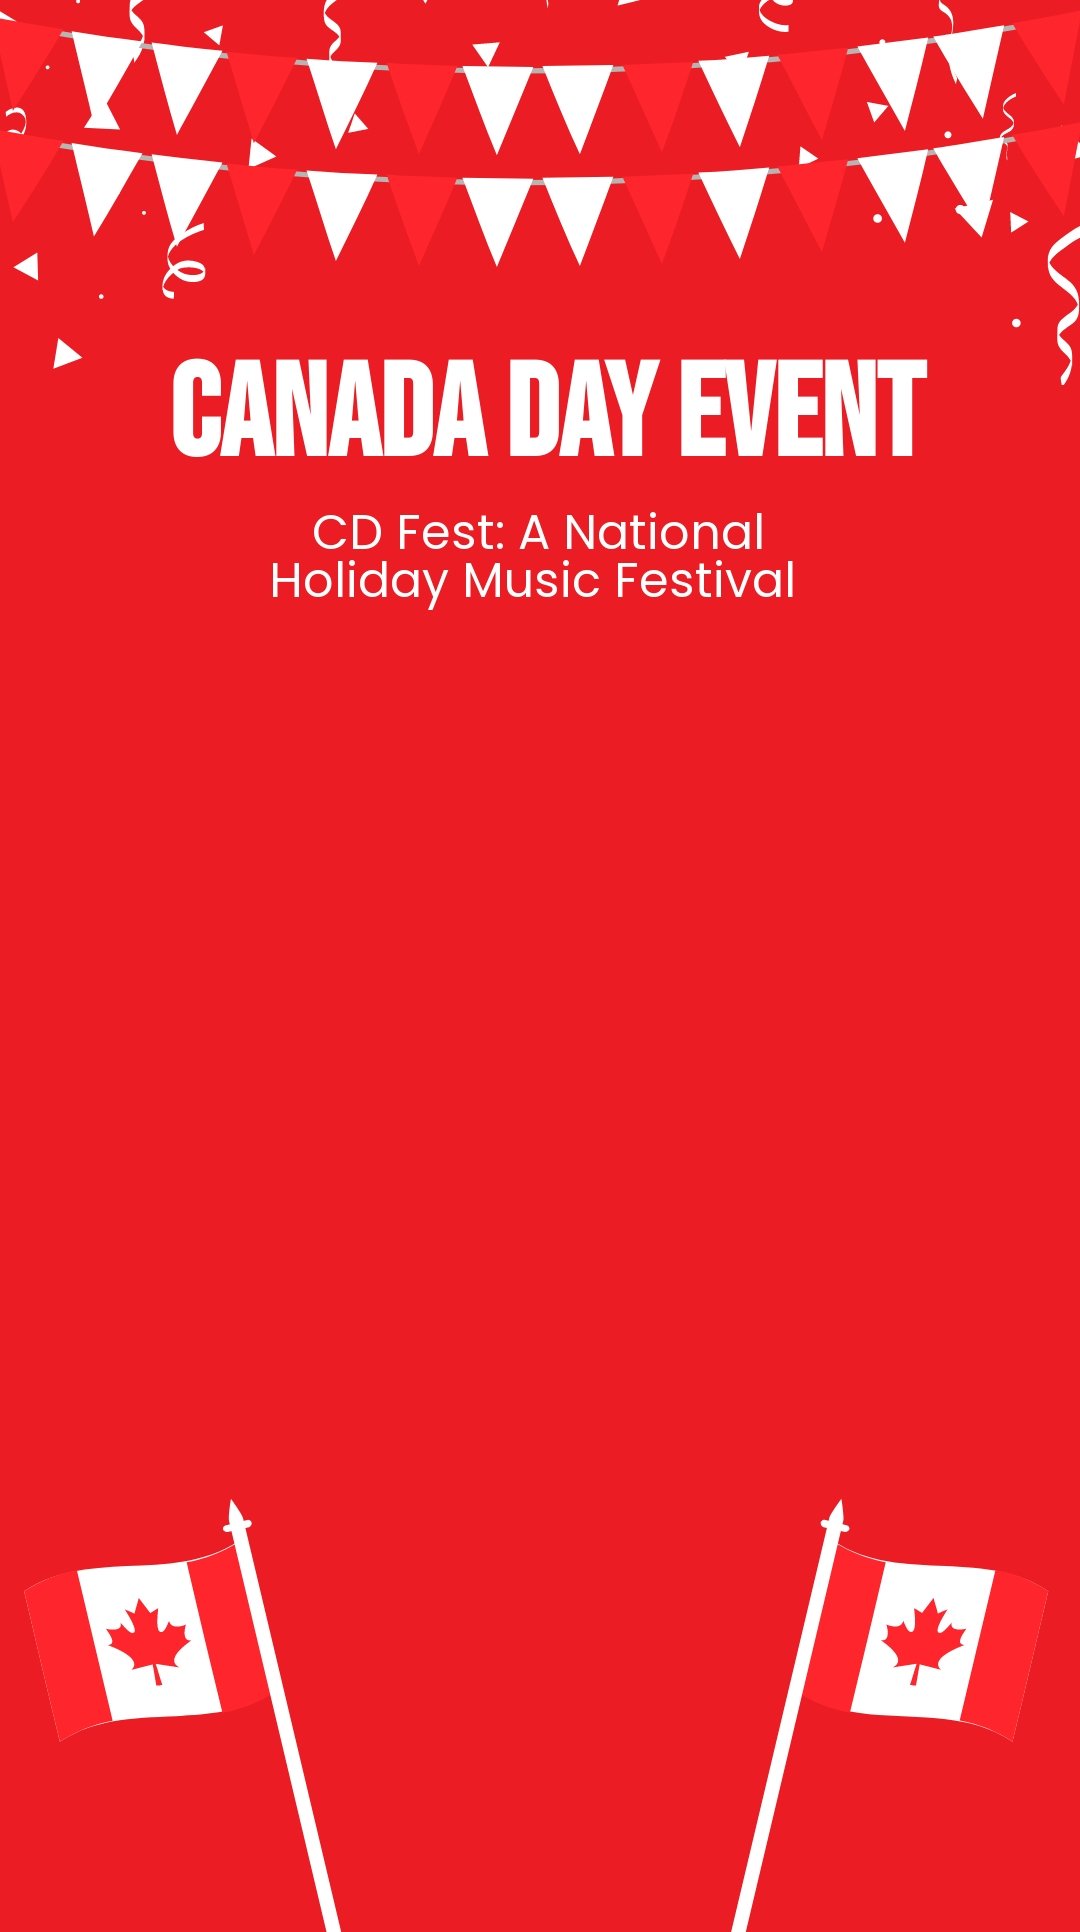 Free Canada Day Event Snapchat Geofilter Template